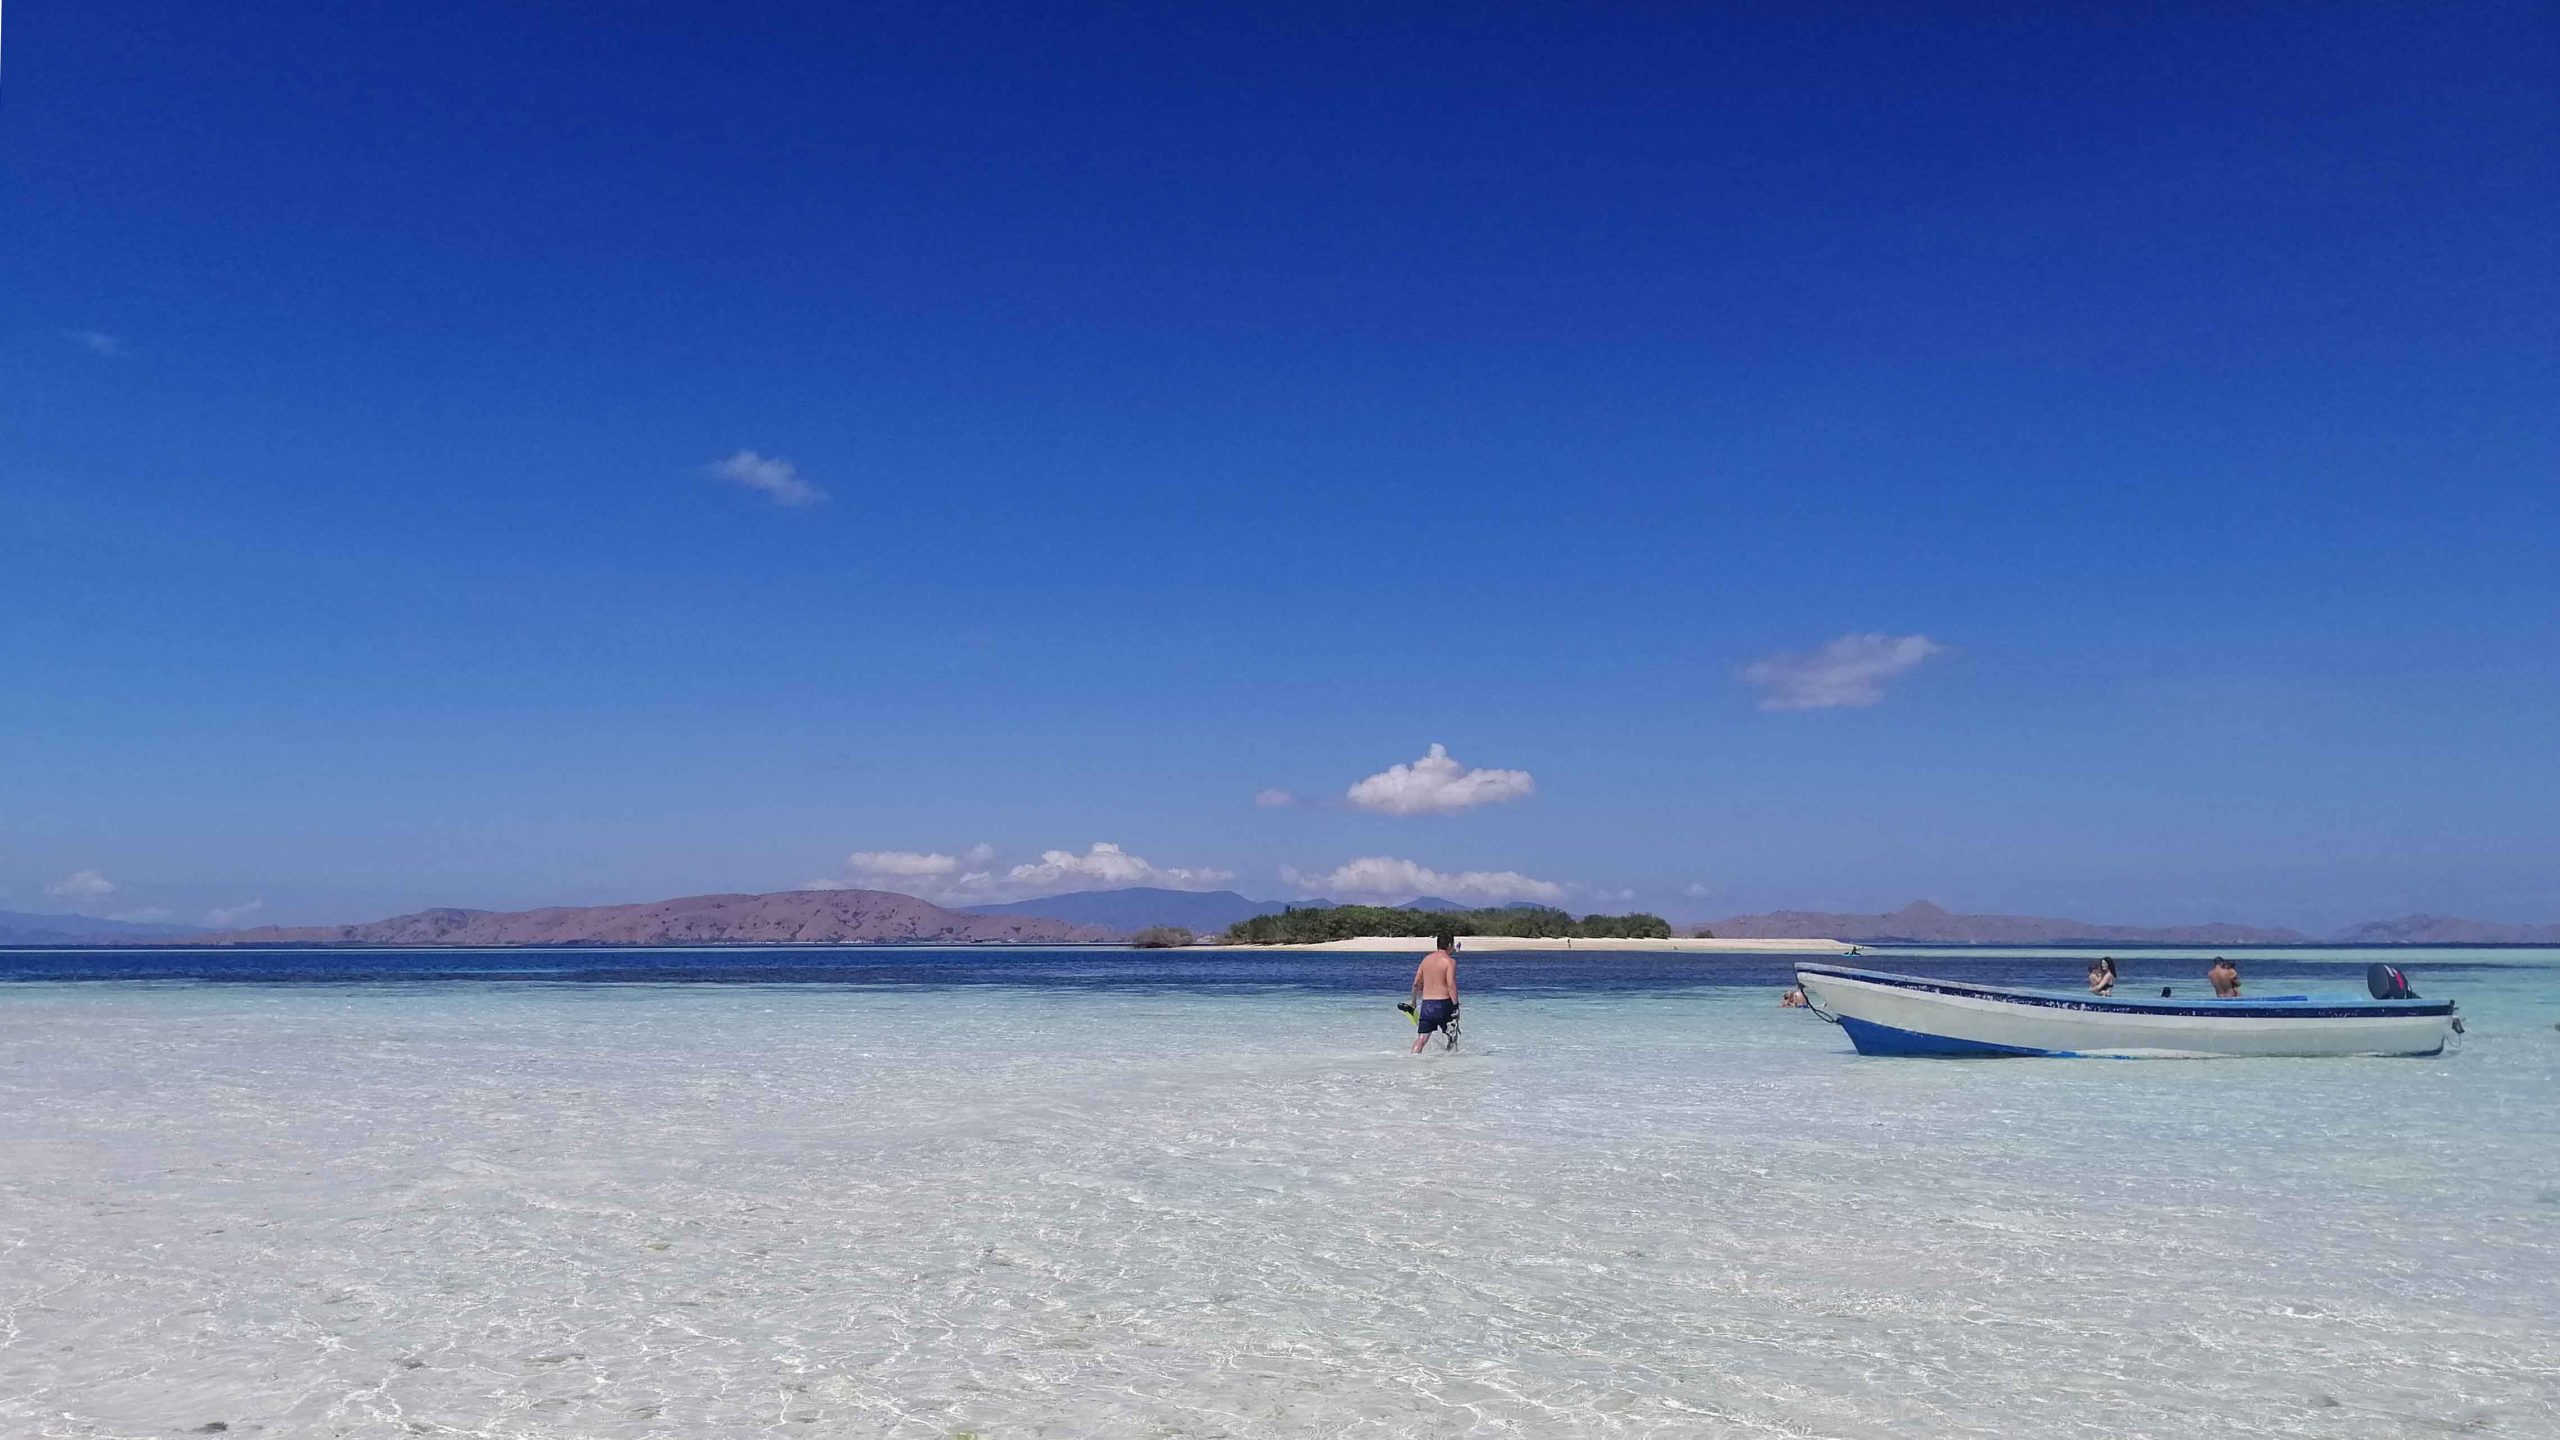 In the middle of the picture, a man is wading in the clear beach water. On the right side, a white small boat. The sky is bright blue. Manta Point | Komodo Leisure Cruise | Bespoke Indonesia Holiday.